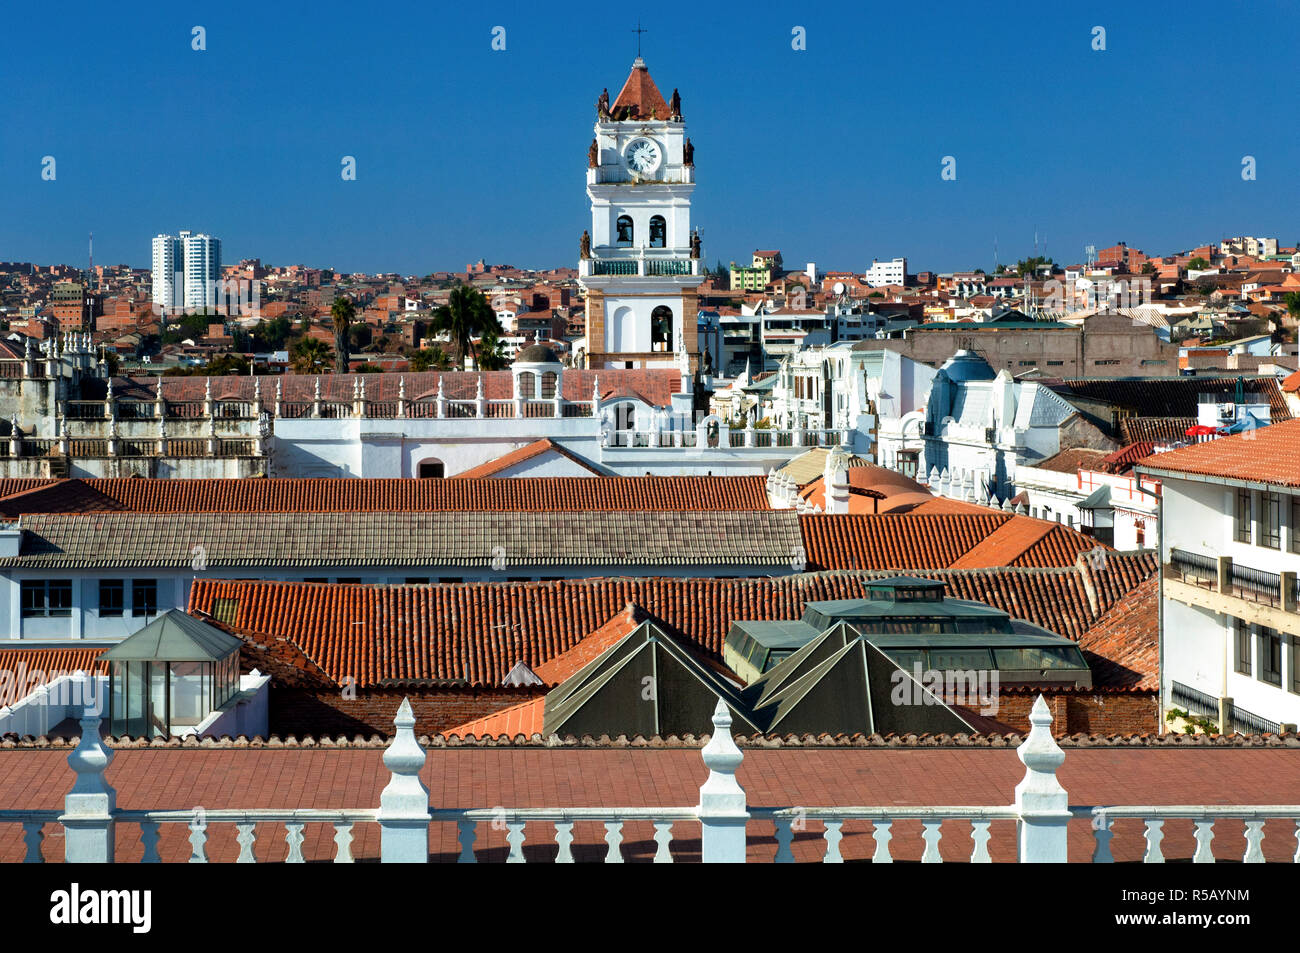 Sucre Cathedral Clock Tower, View From The Rooftop Of The San Felipe de Neri Monastery, Sucre, Bolivia, The White City, La Ciudad Blanca, UNESCO World Heritage Site. Stock Photo